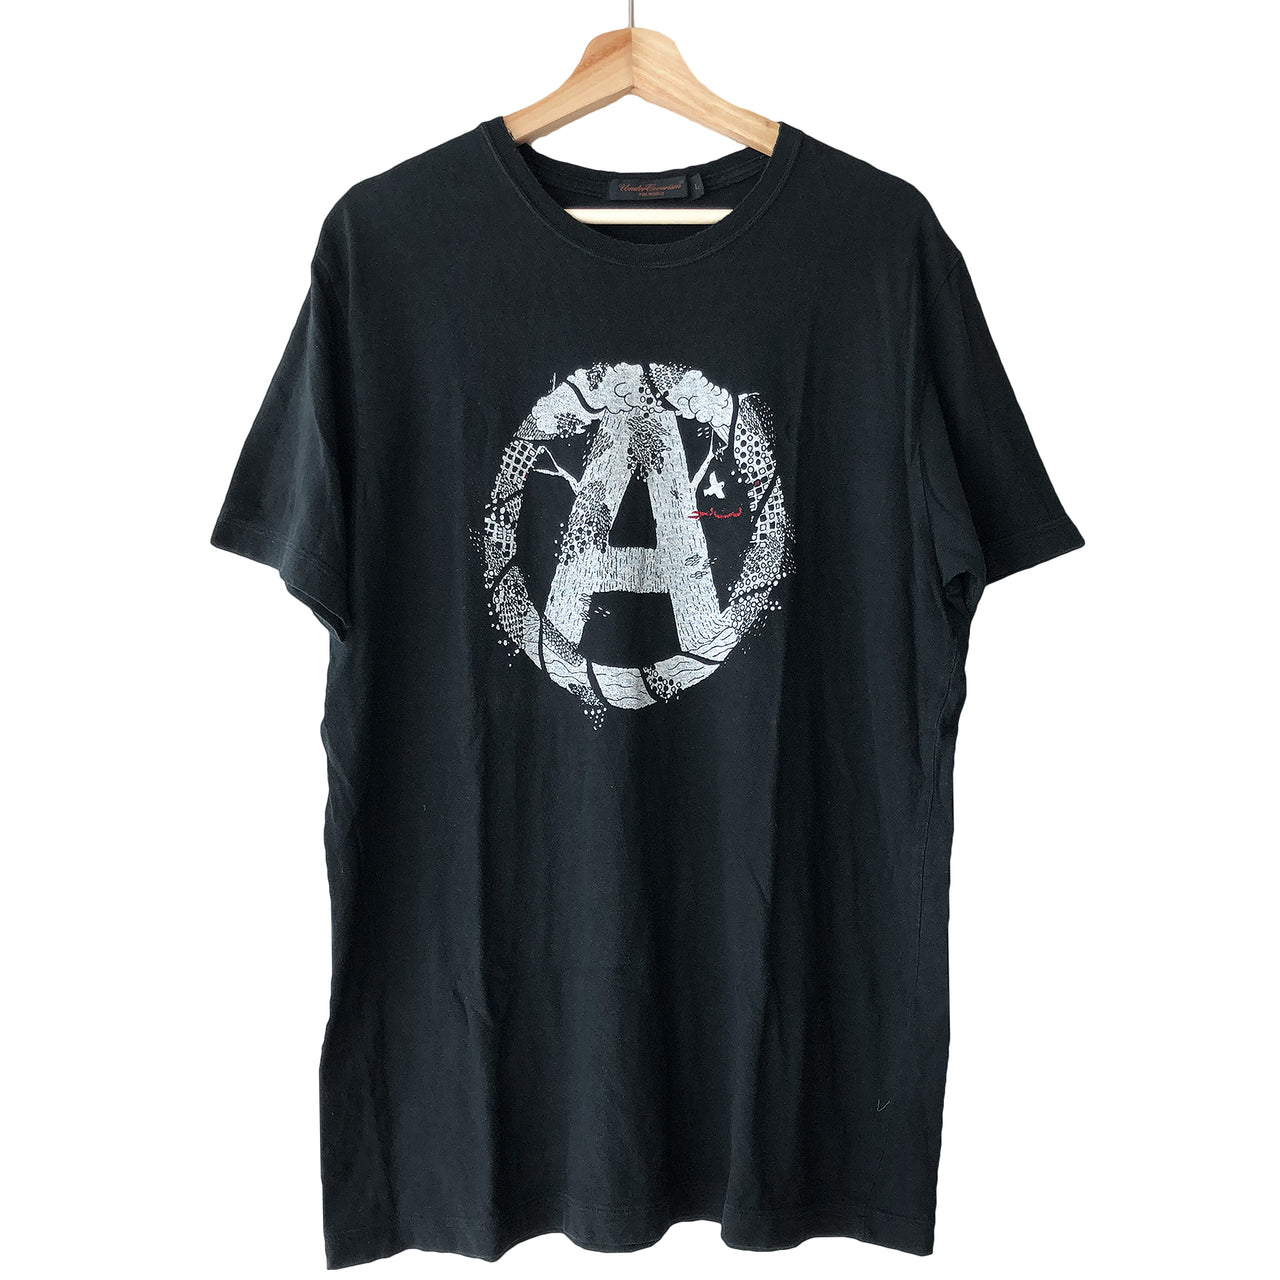 Undercover Black Anarchy Tee